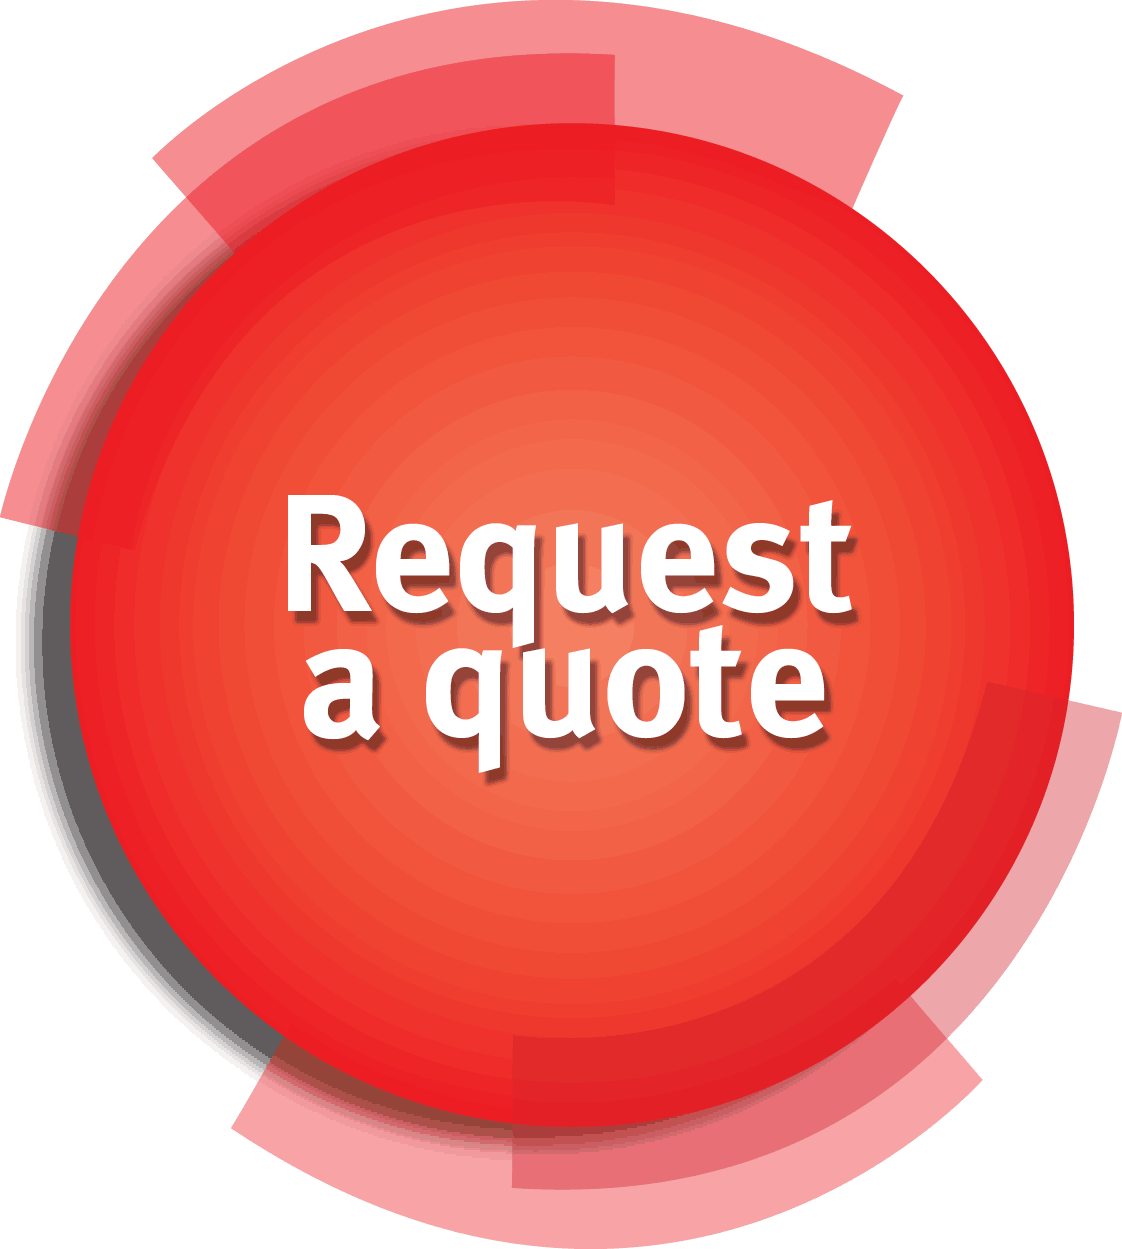 Request Your Free, Personalized Sales Quote Now!